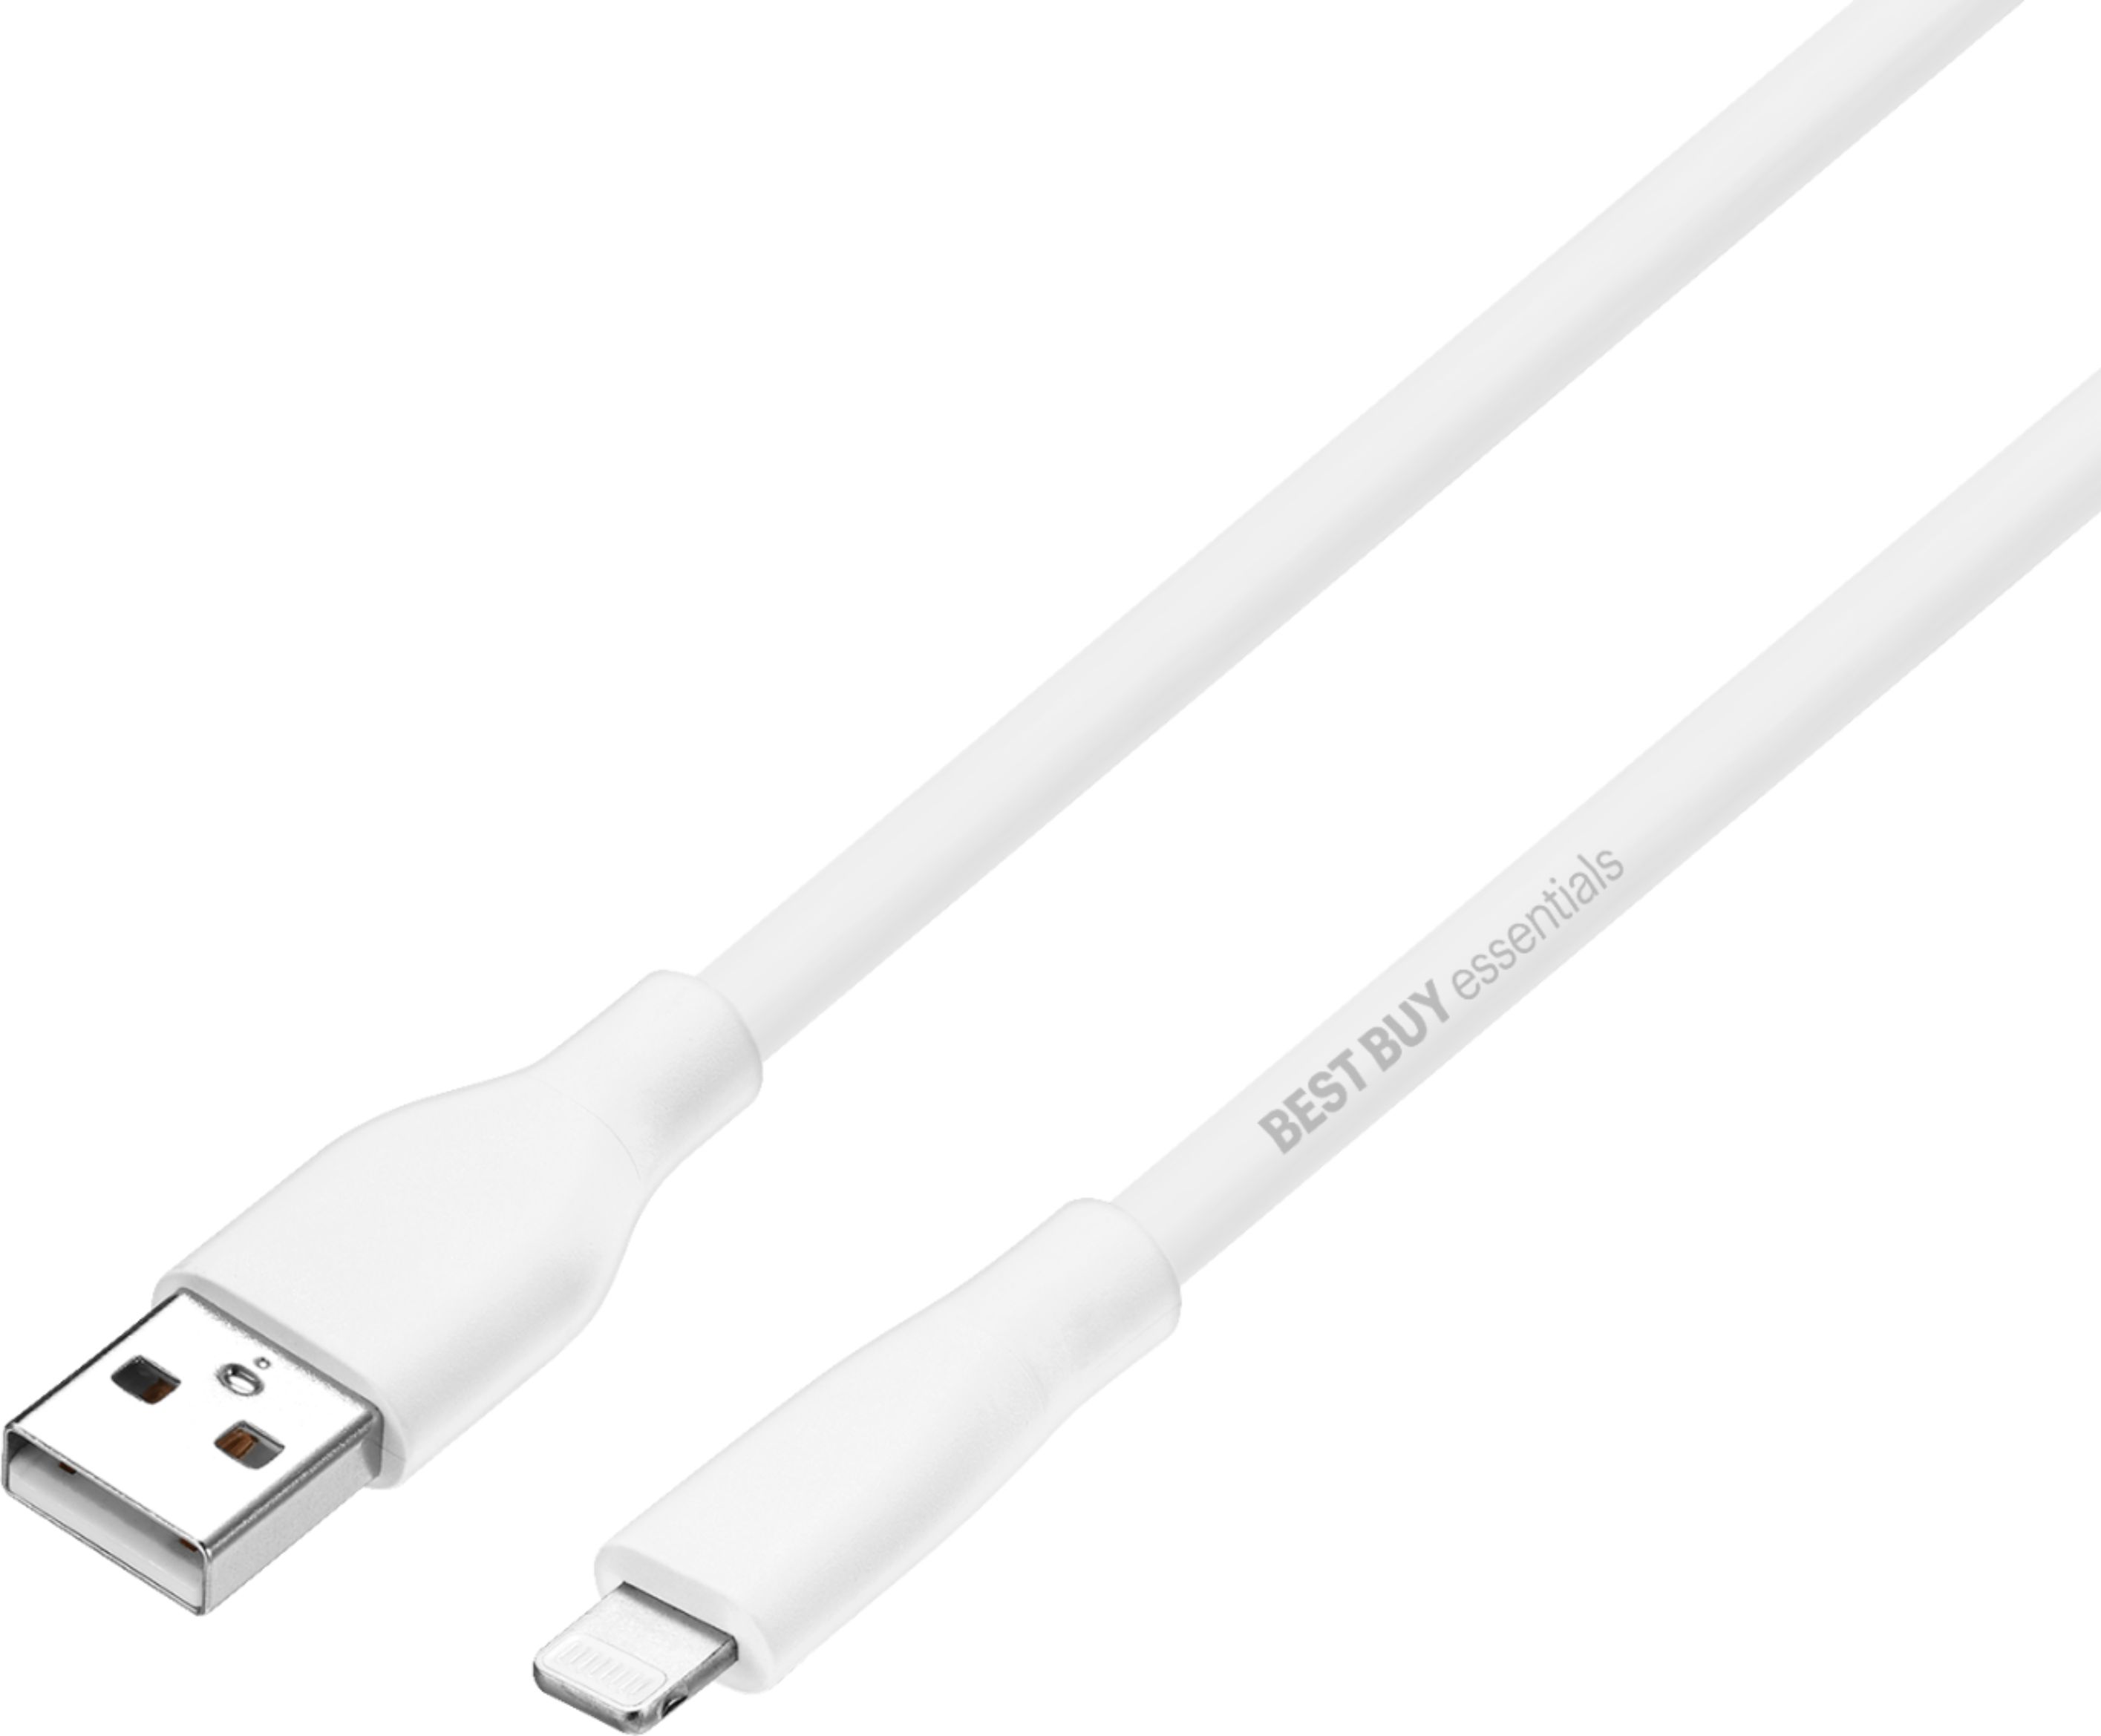 Kostuum bladeren einde Best Buy essentials™ 9' Lightning to USB Charge-and-Sync Cable White  BE-MLA922W - Best Buy